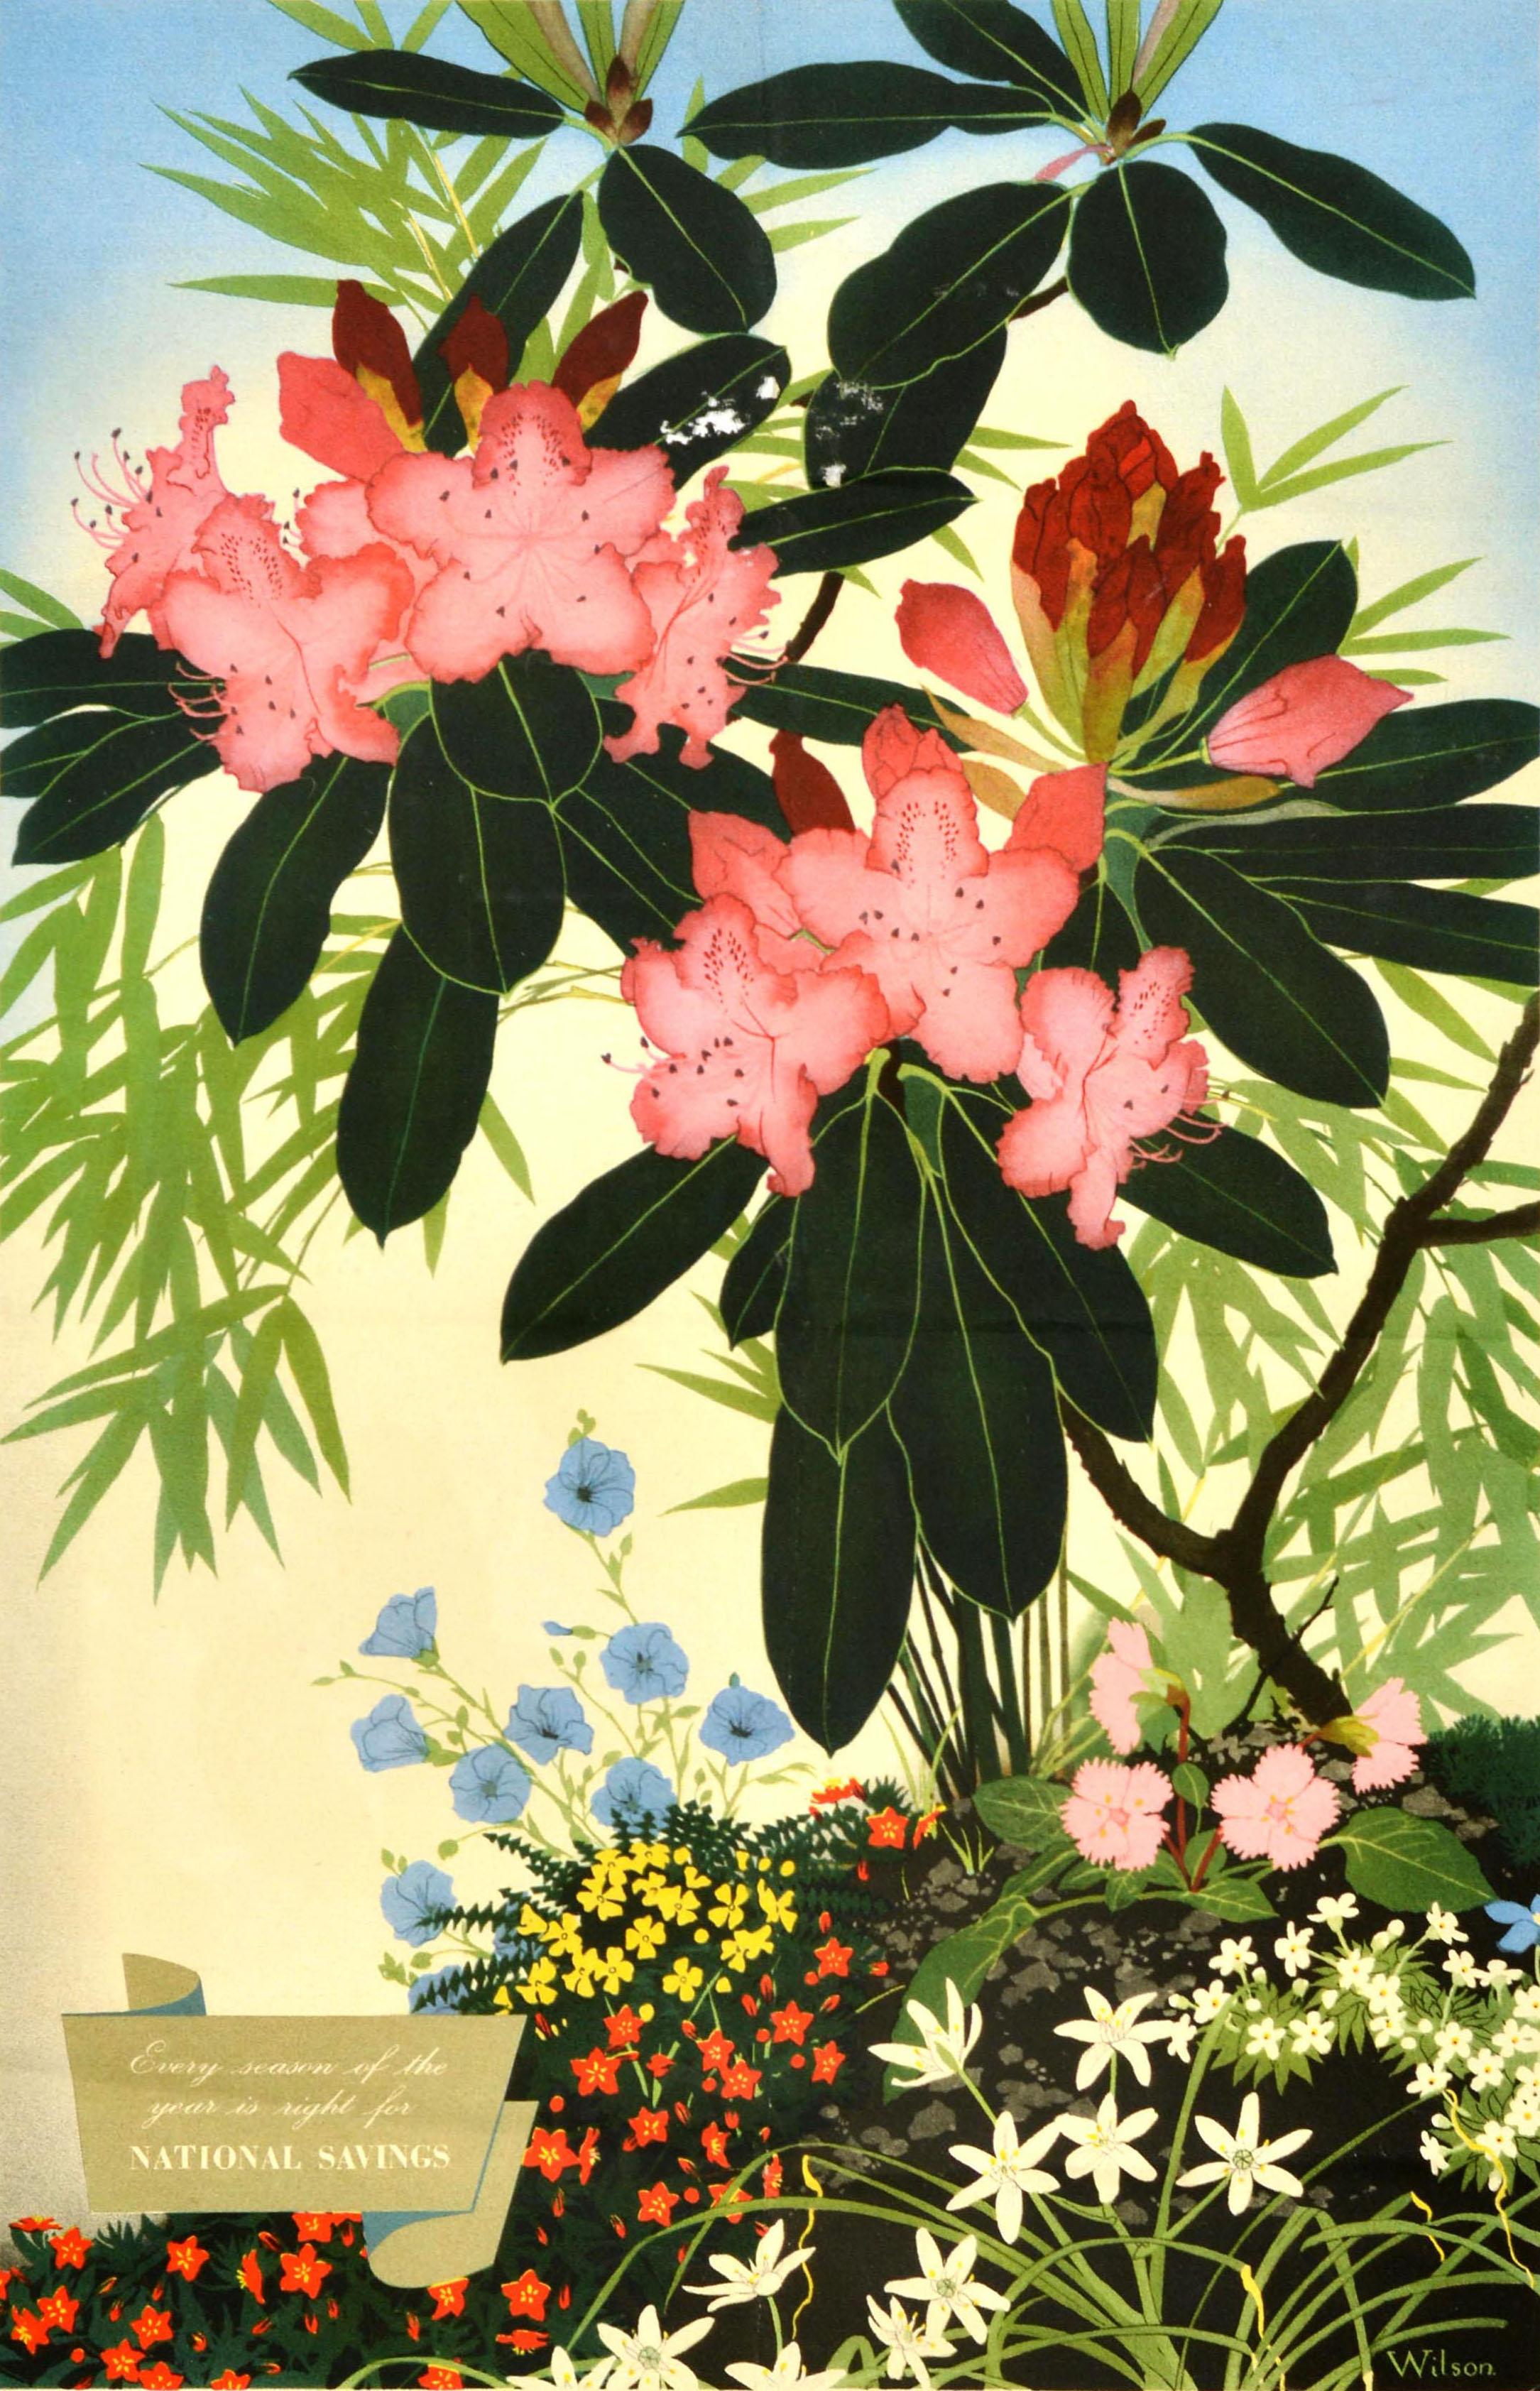 Original vintage advertising poster - National Savings Through the Post Office Savings Bank, The Trustee Savings Bank and National Savings Certificates - featuring colourful artwork of red, yellow, white, blue and pink flowers with green leaves and